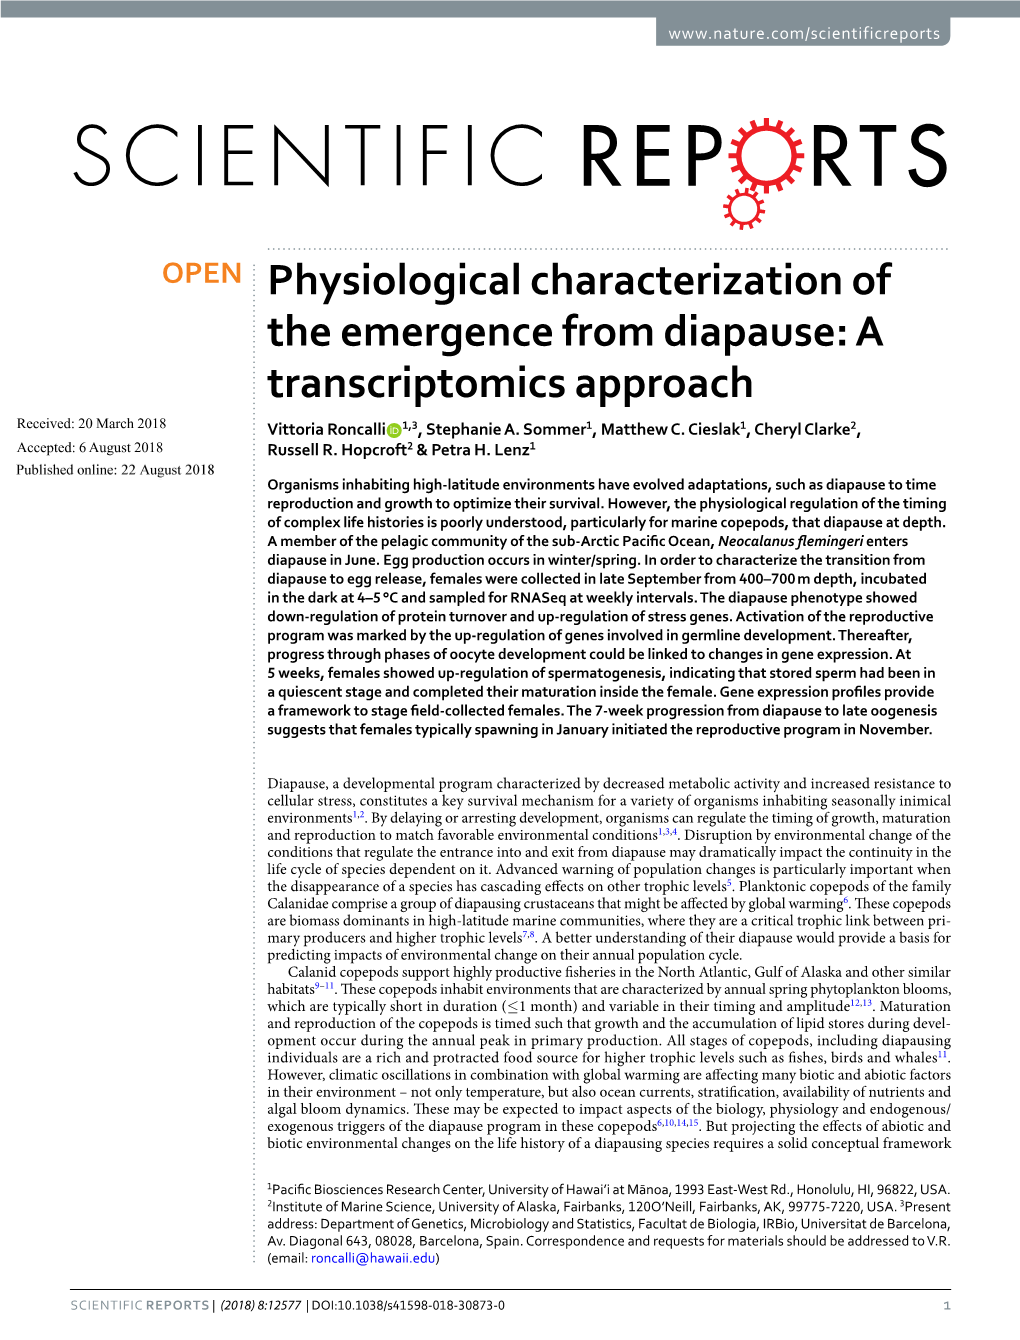 Physiological Characterization of the Emergence from Diapause: a Transcriptomics Approach Received: 20 March 2018 Vittoria Roncalli 1,3, Stephanie A